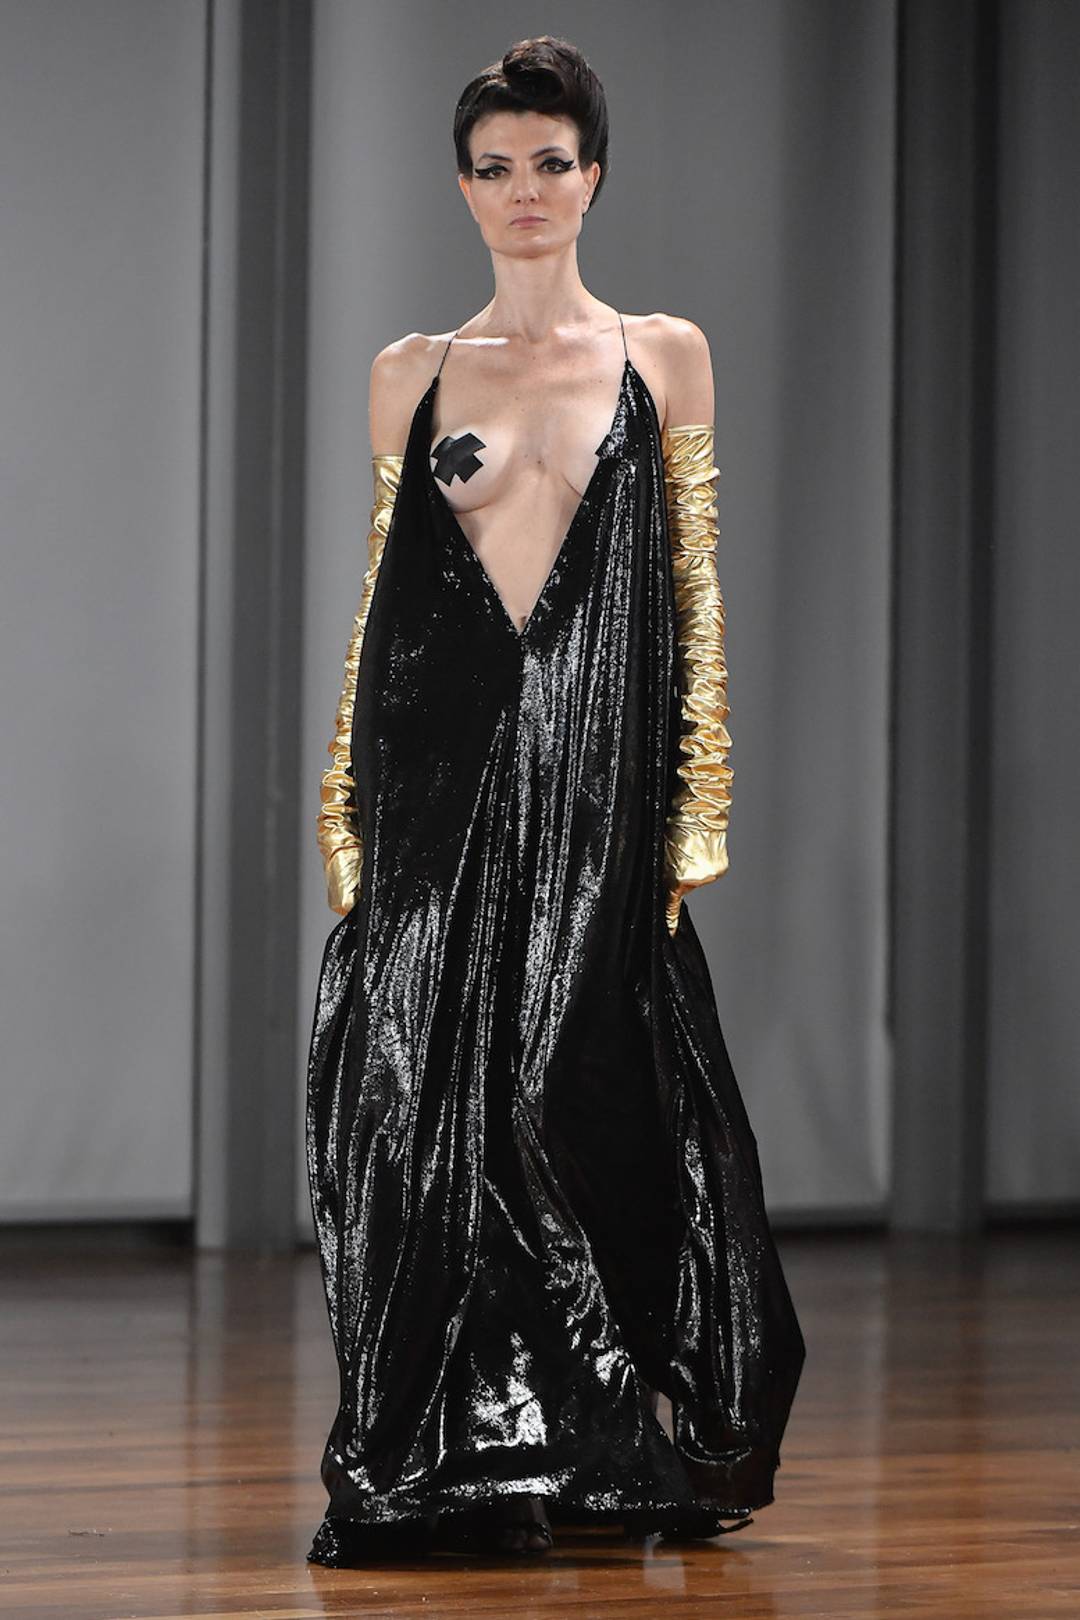 A revealing neckline and more sparkles at André Lima FW24.